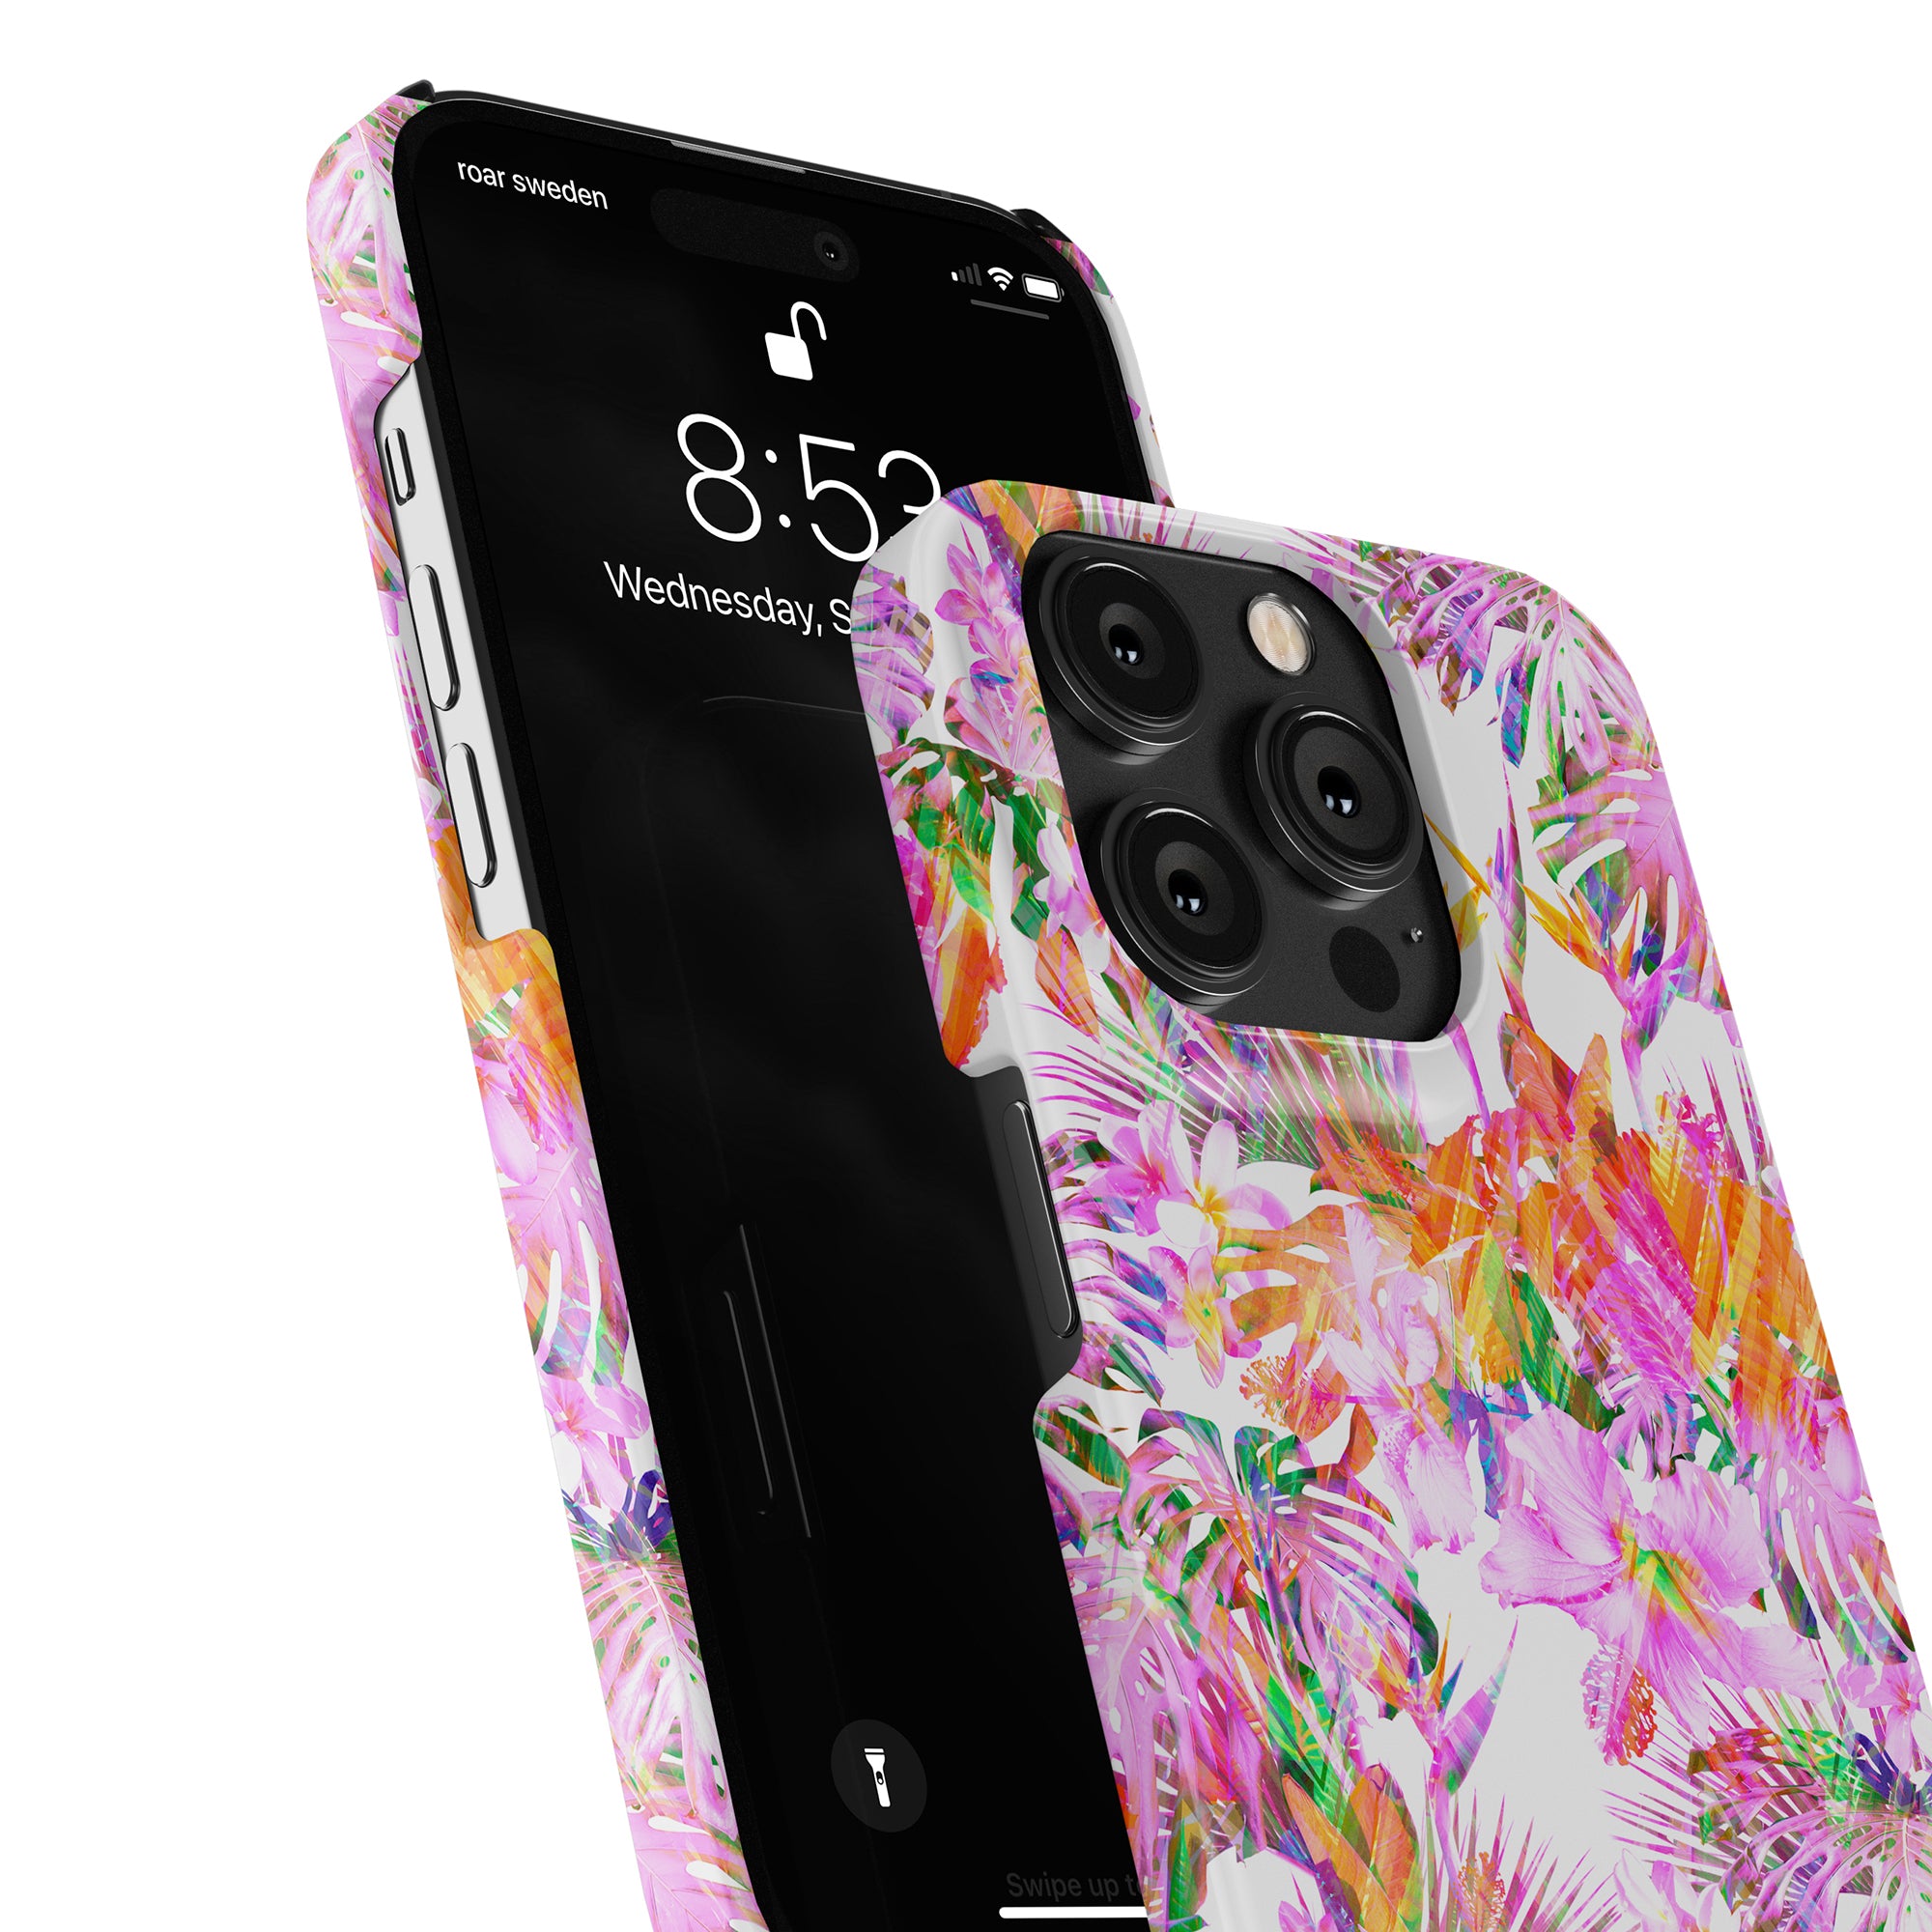 A tropical floral pattern Summer Vibe - Slim case, perfect for adding a vibrant "Summer Vibe" to your phone.